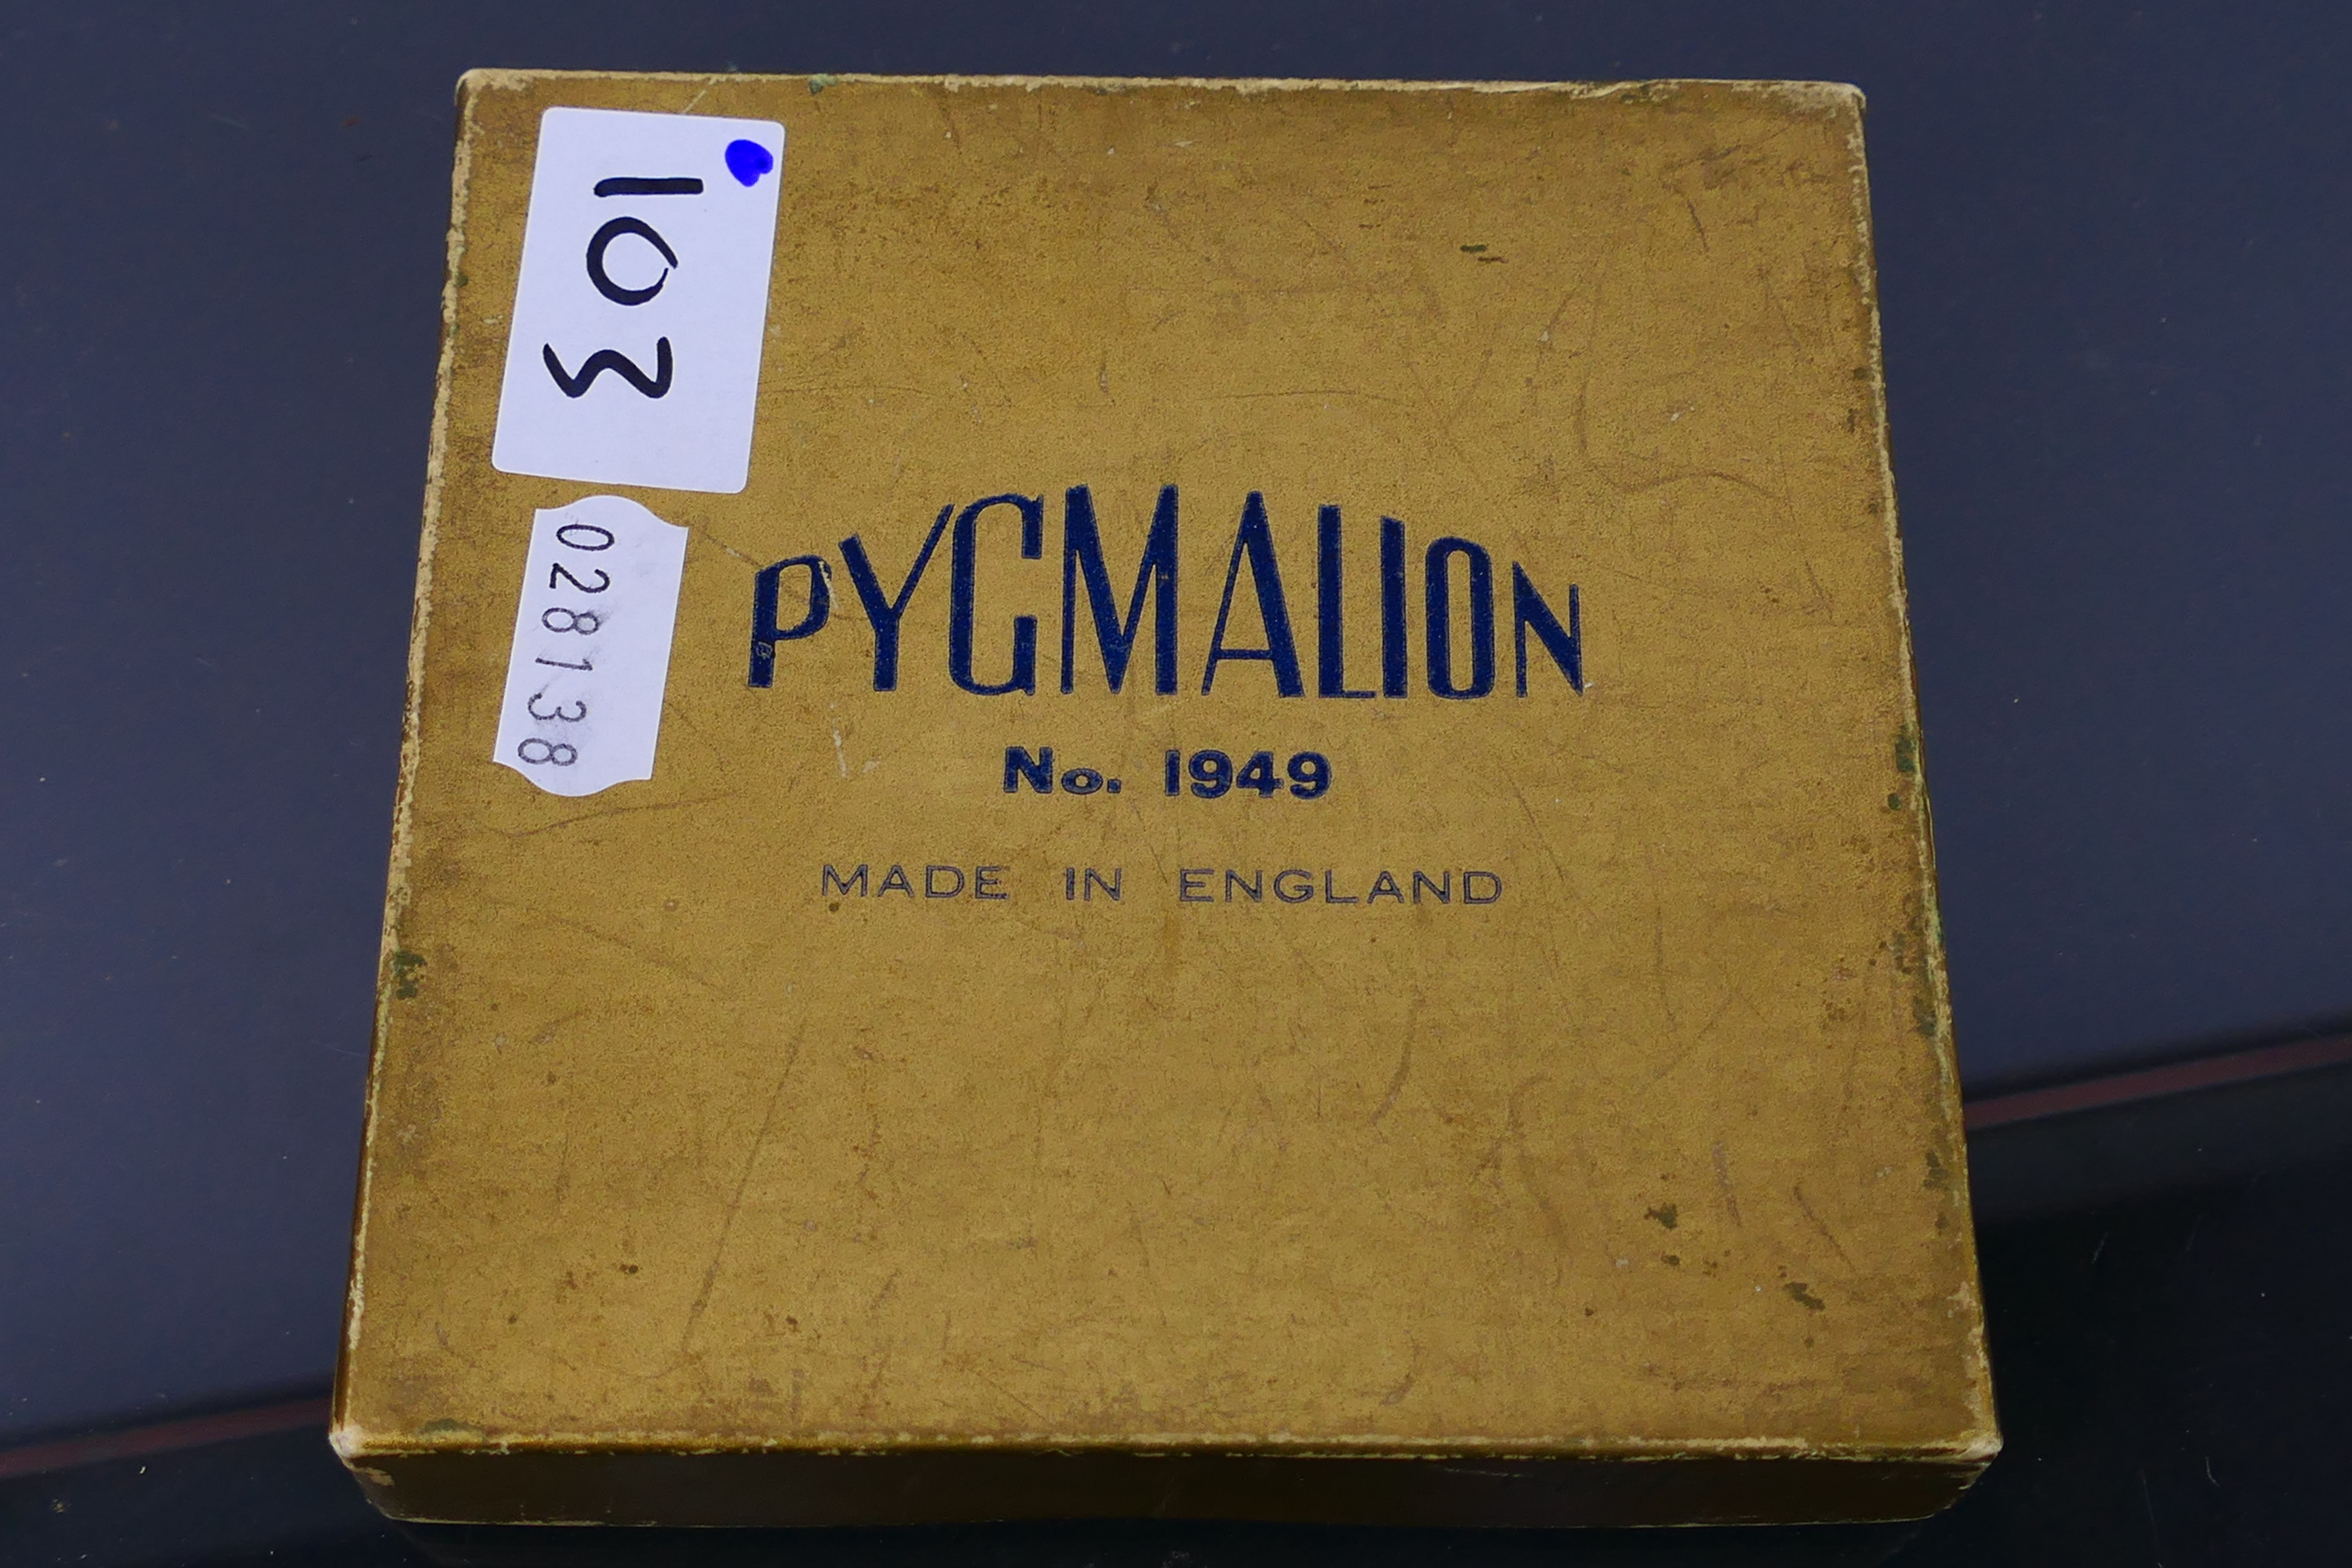 A boxed vintage Pygmalion 1949 gilt metal and enamel powder compact. Made in England. - Image 8 of 8